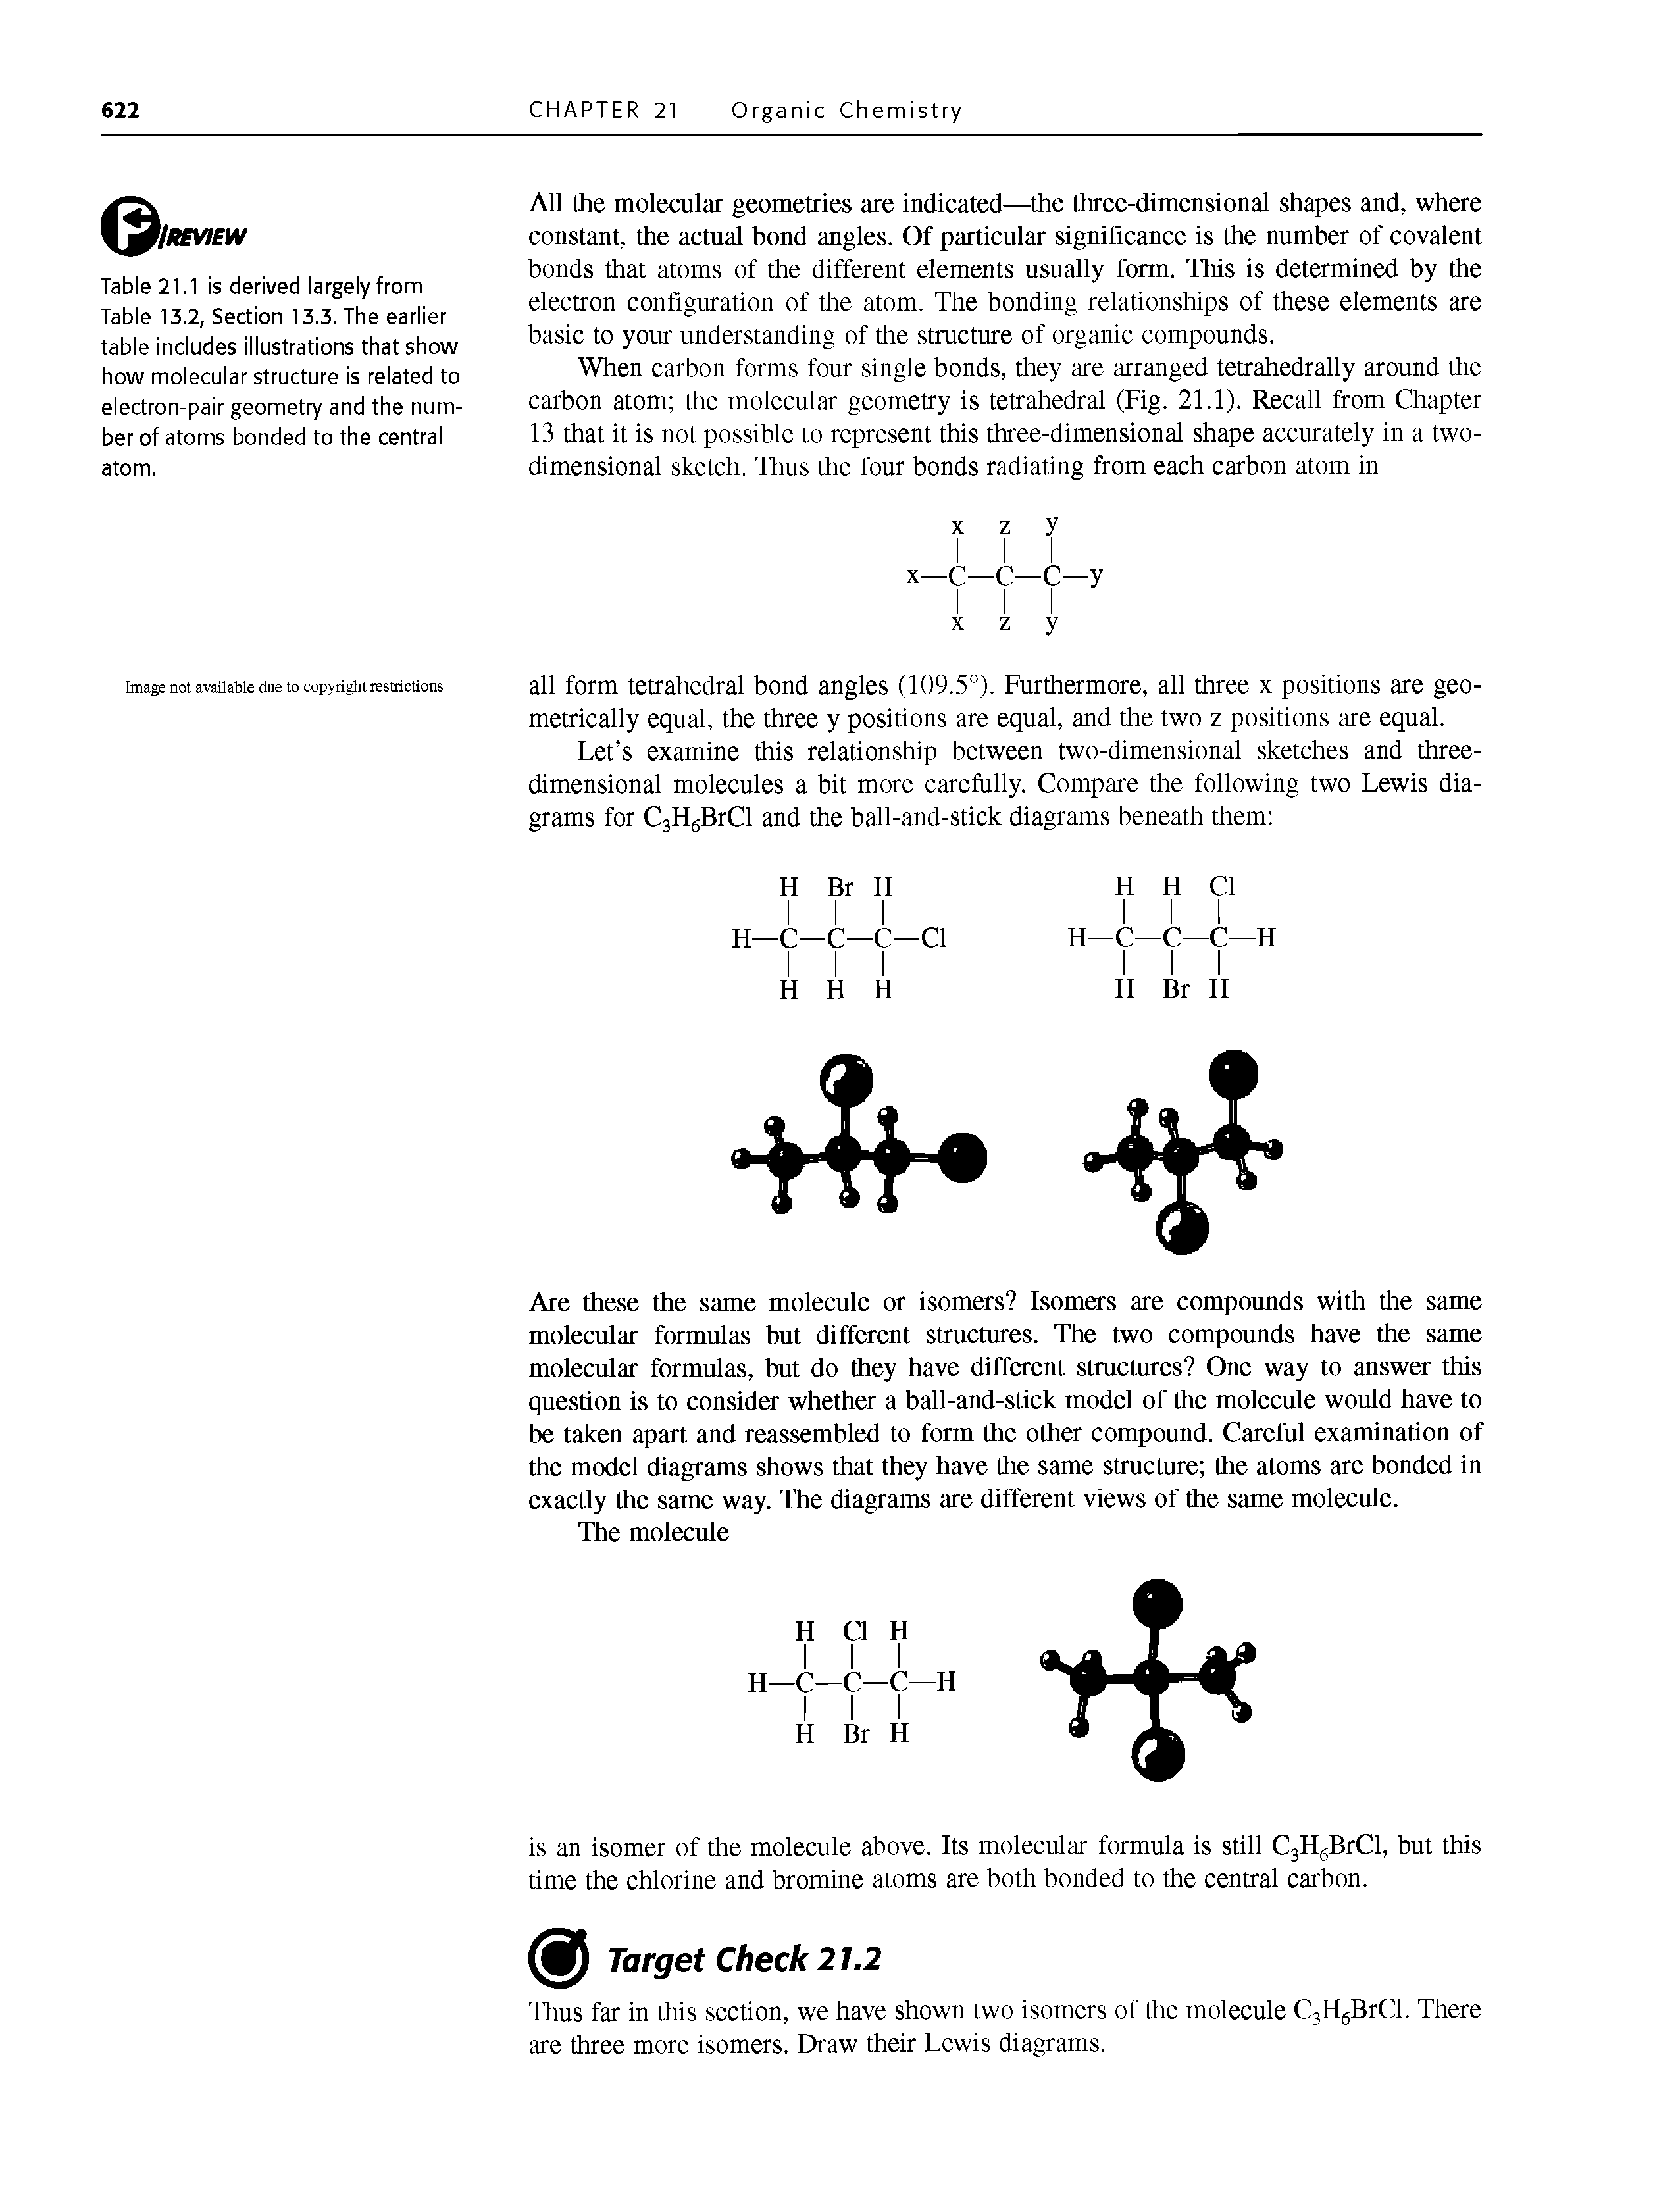 Table21.1 is derived largely from Table 13.2, Section 13.3. The earlier table Includes Illustrations that show how molecular structure Is related to electron-pair geometry and the number of atoms bonded to the central atom.